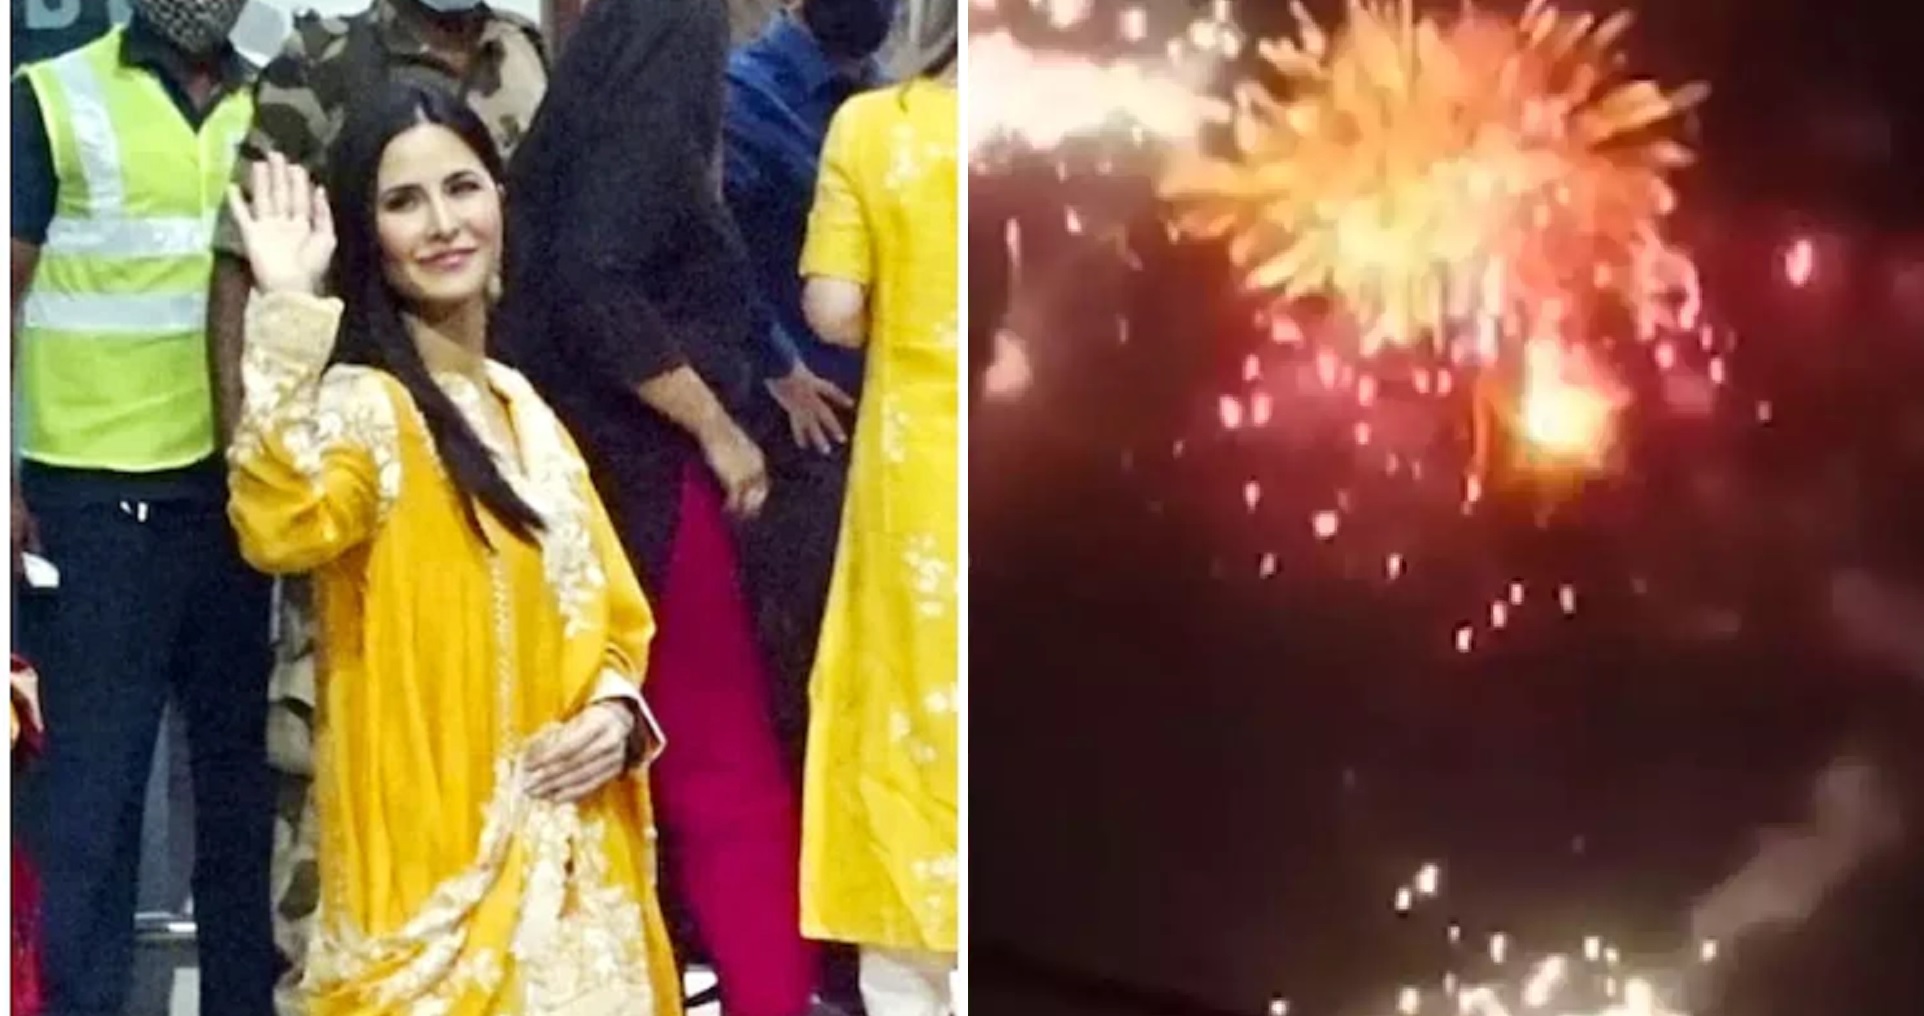 Katrina Kaif Stuns In Yellow Attire Before Wedding With Vicky Kaushal, Meanwhile Skies Lit With Firework over Six Senses Fort Barwara